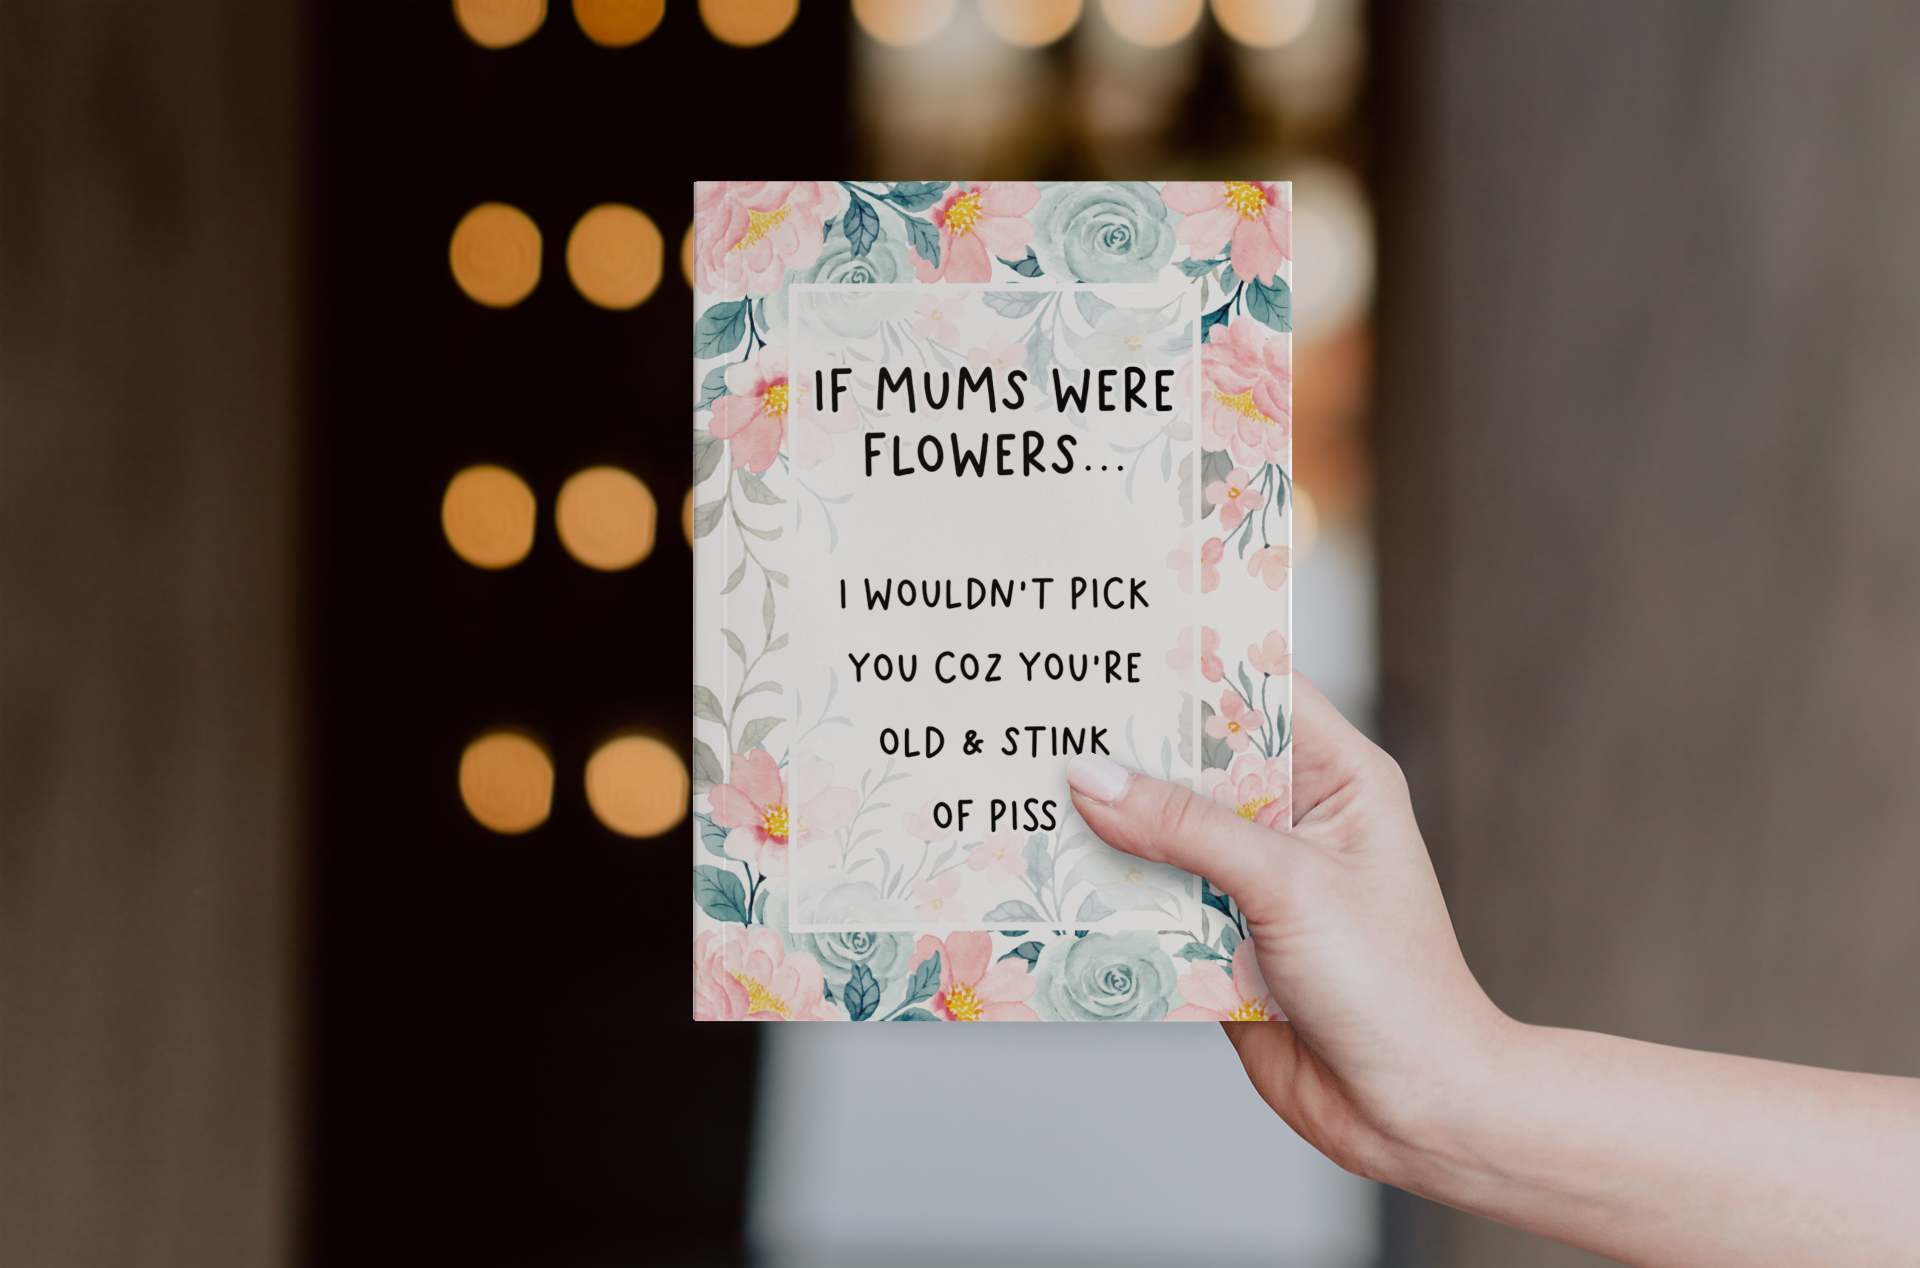 Greetings card with a pastel colour floral design to the front with the quote 'if mums were flowers... i wouldn't pick you coz you're old & stink of piss' printed in the middle in black ink.